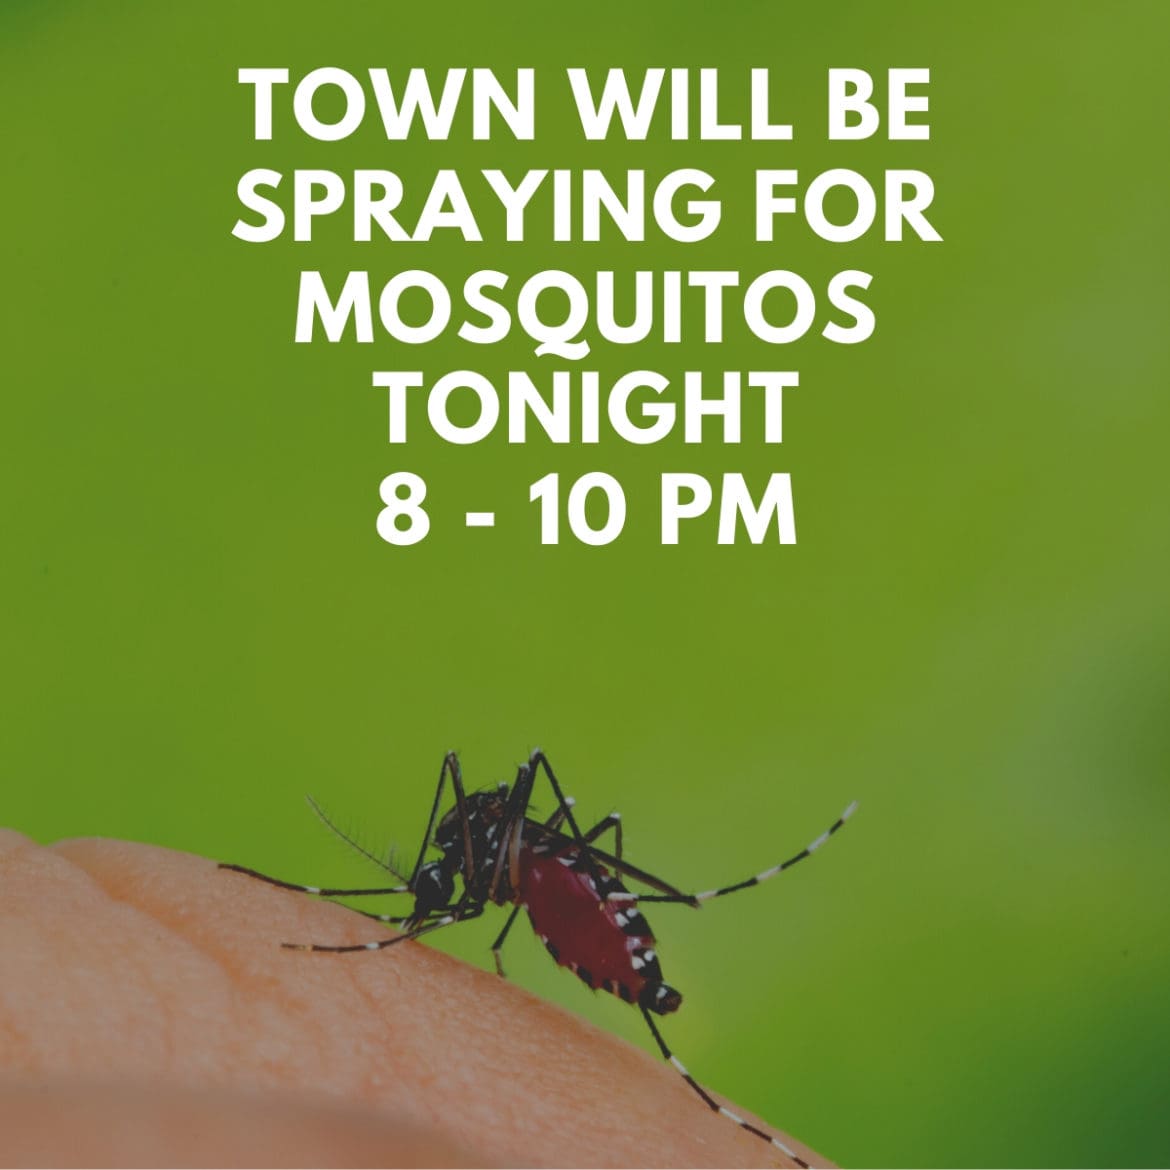 TOWN WILL BE SPRAYING FOR MOSQUITOS